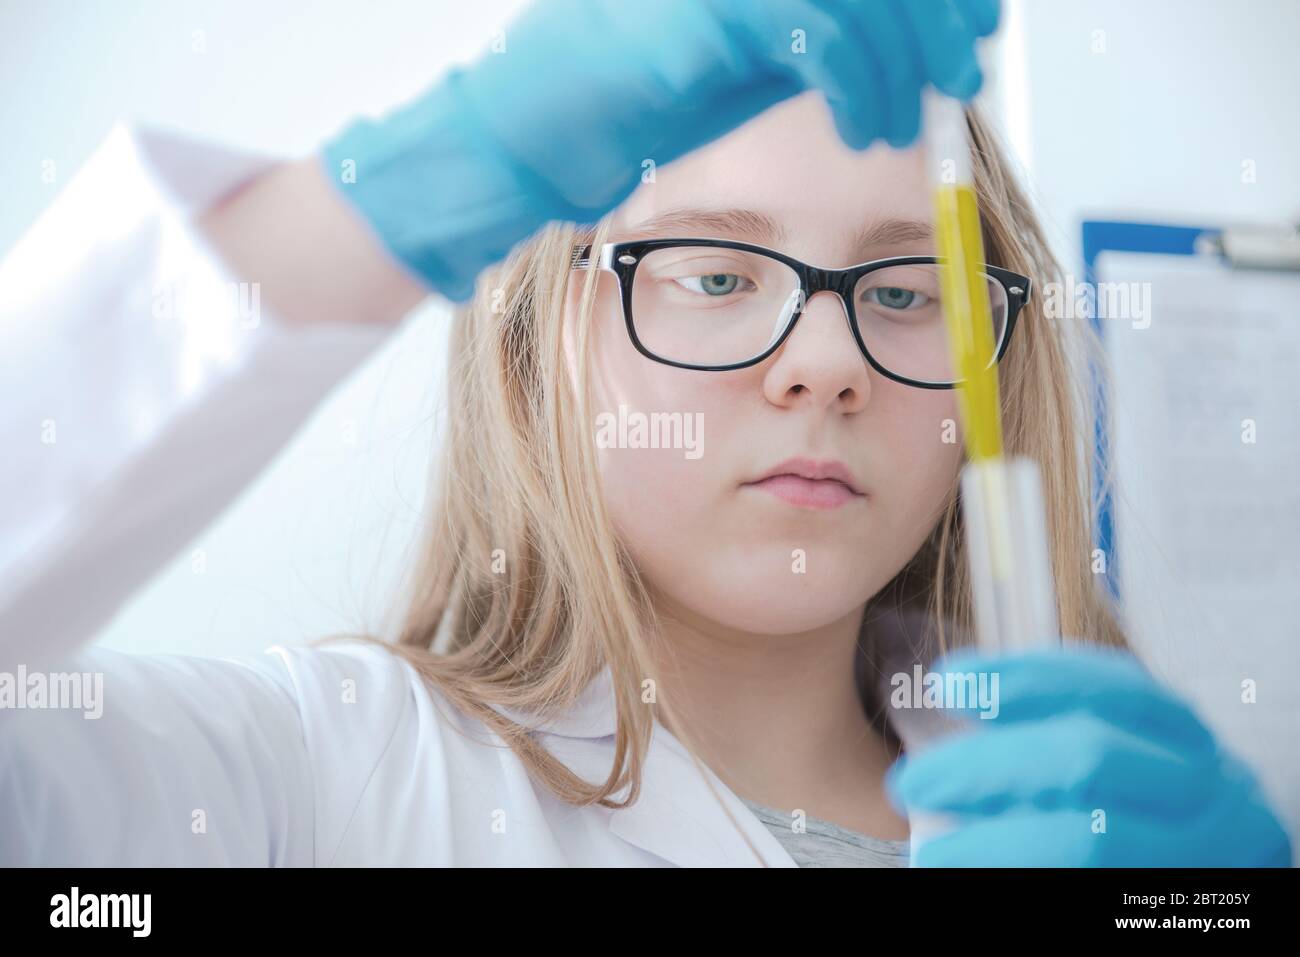 School Age Girl In Chemistry Class Using Test Tube And Pipette Wearing Protective Glasses Lab Coat And Gloves. Stock Photo